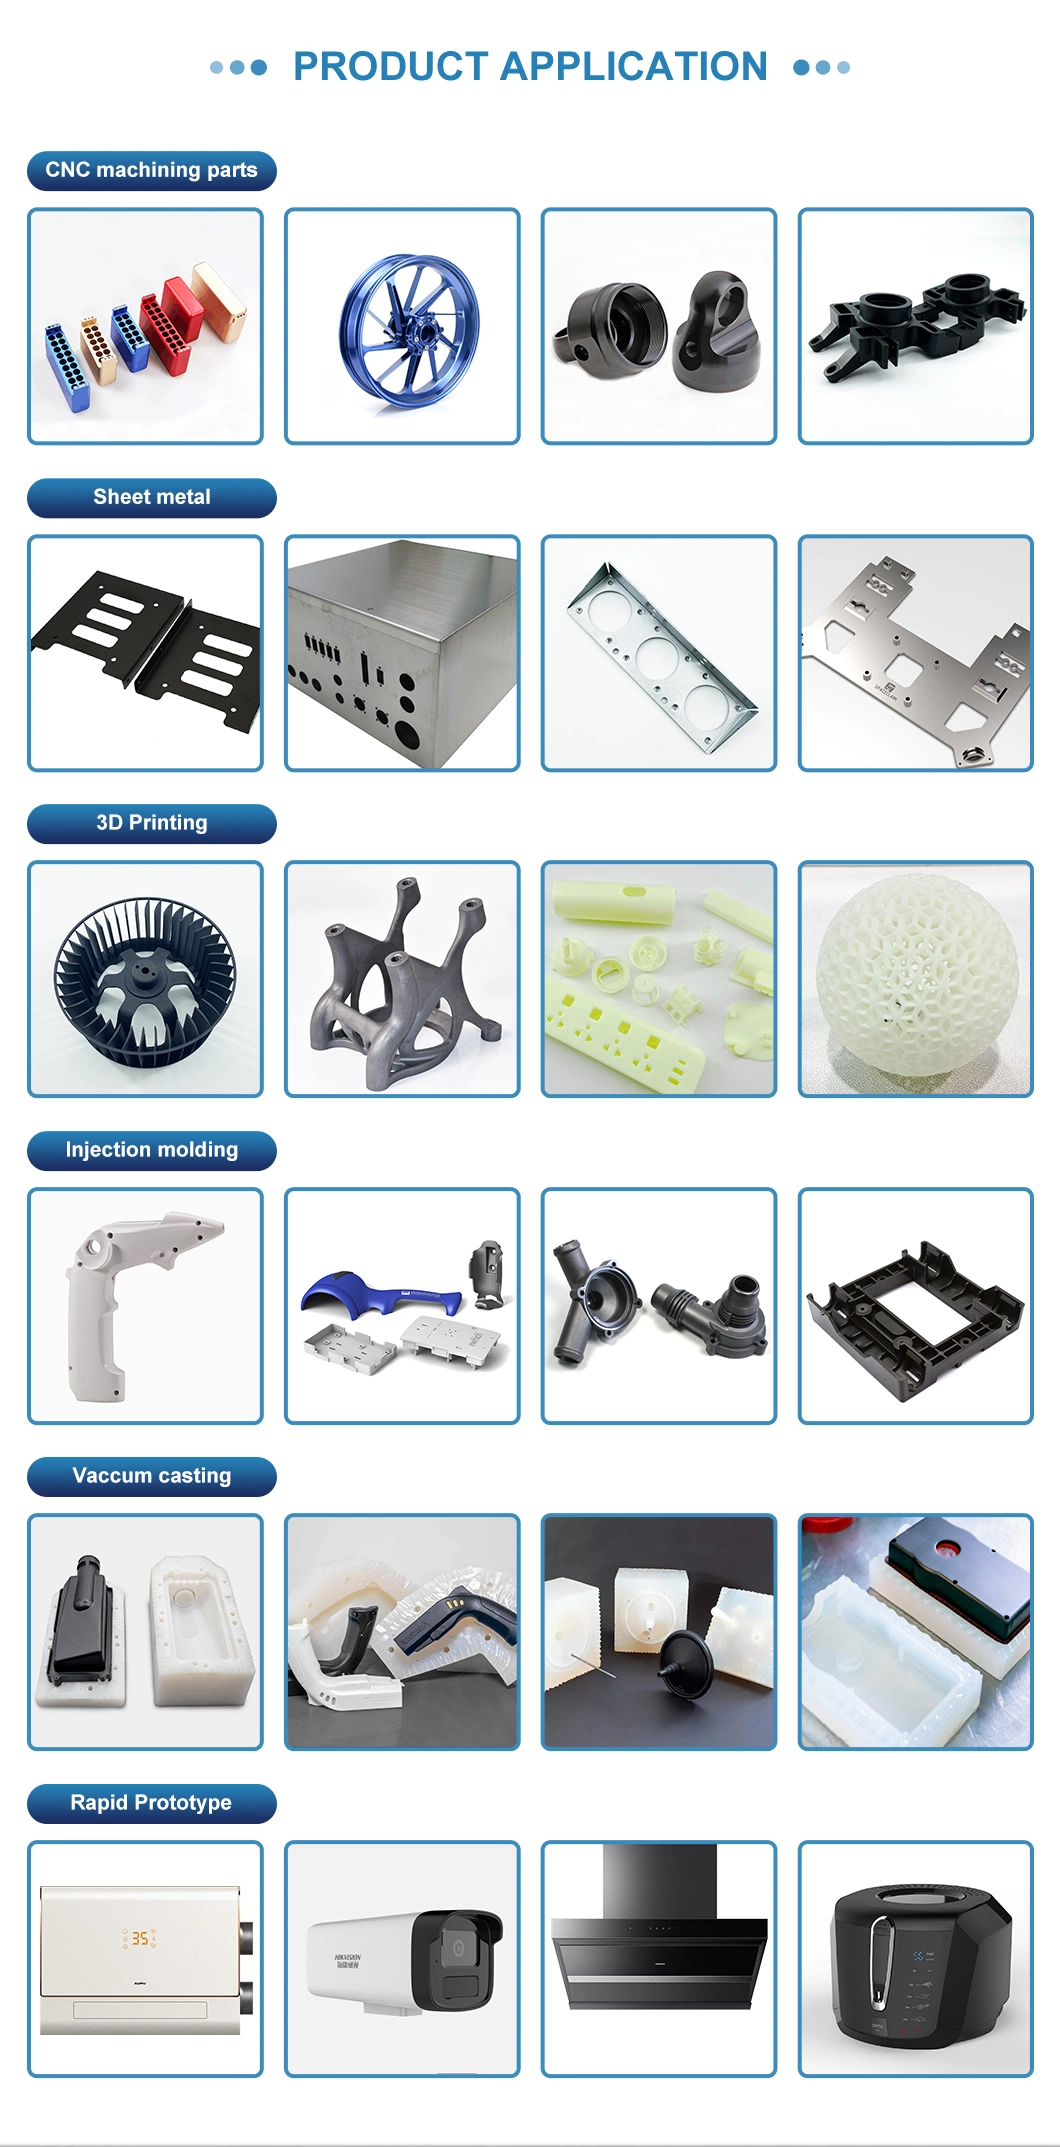 Mouse and Keyboard Parts, Small Plastic Mold Parts, Customized POM Peek PSU Mold, Injection Molding, Plastic Injection Molding